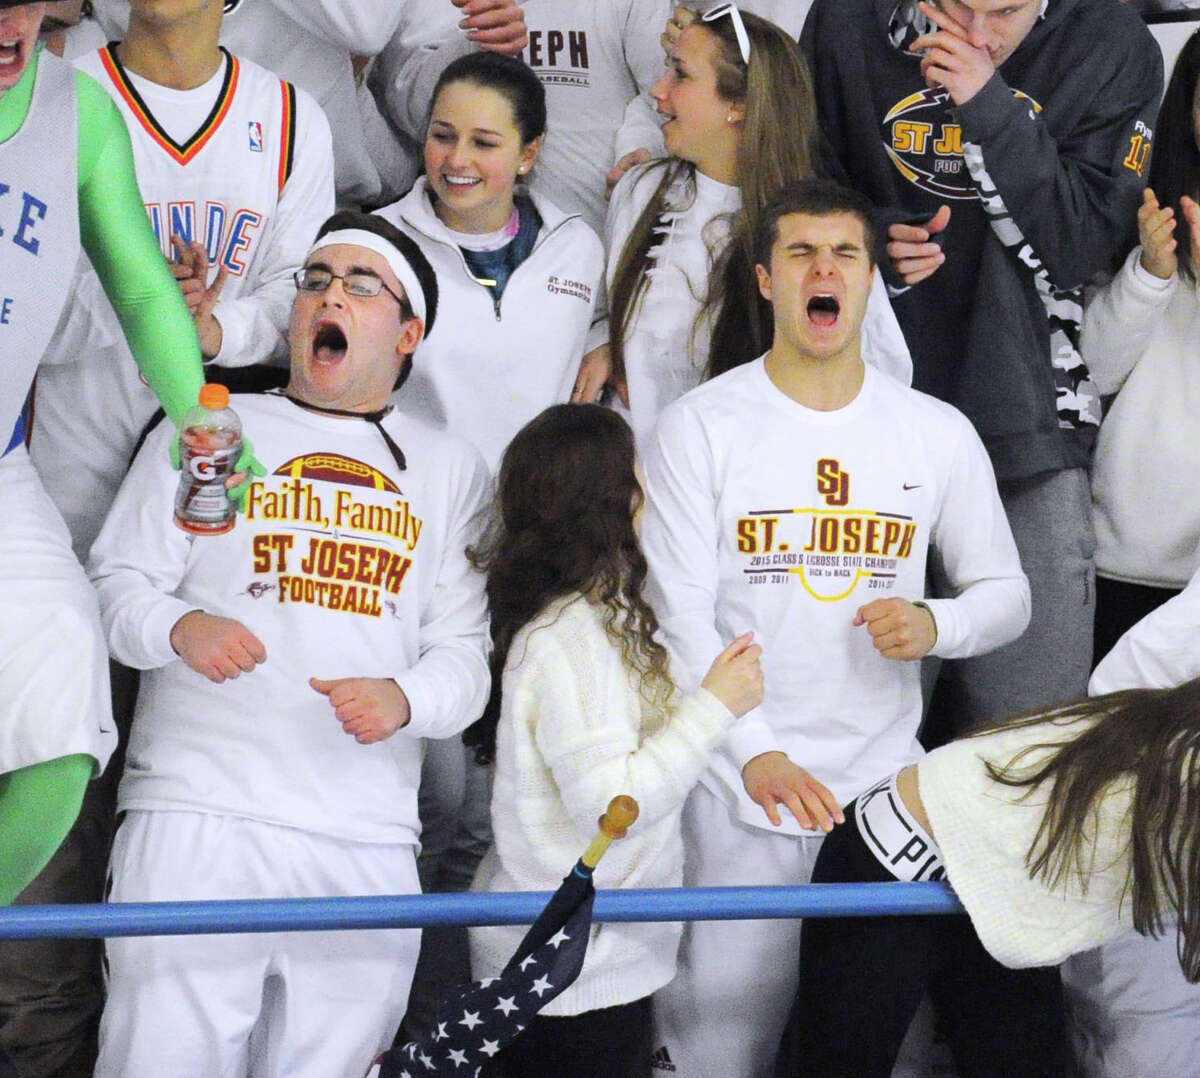 The FCIAC boys hockey championship game between St. Joseph High School and Greenwich High School at Terry Connors Rink in Stamford, Conn., Saturday, March 5, 2016. Greenwich took the title 5-0 over St. Joe's as Mike Mozian of Greenwich,who scored two goals, was named the MVP. Greenwich goaltender Nicholas Bozzuto was credited with 19 saves and got the shut-out.